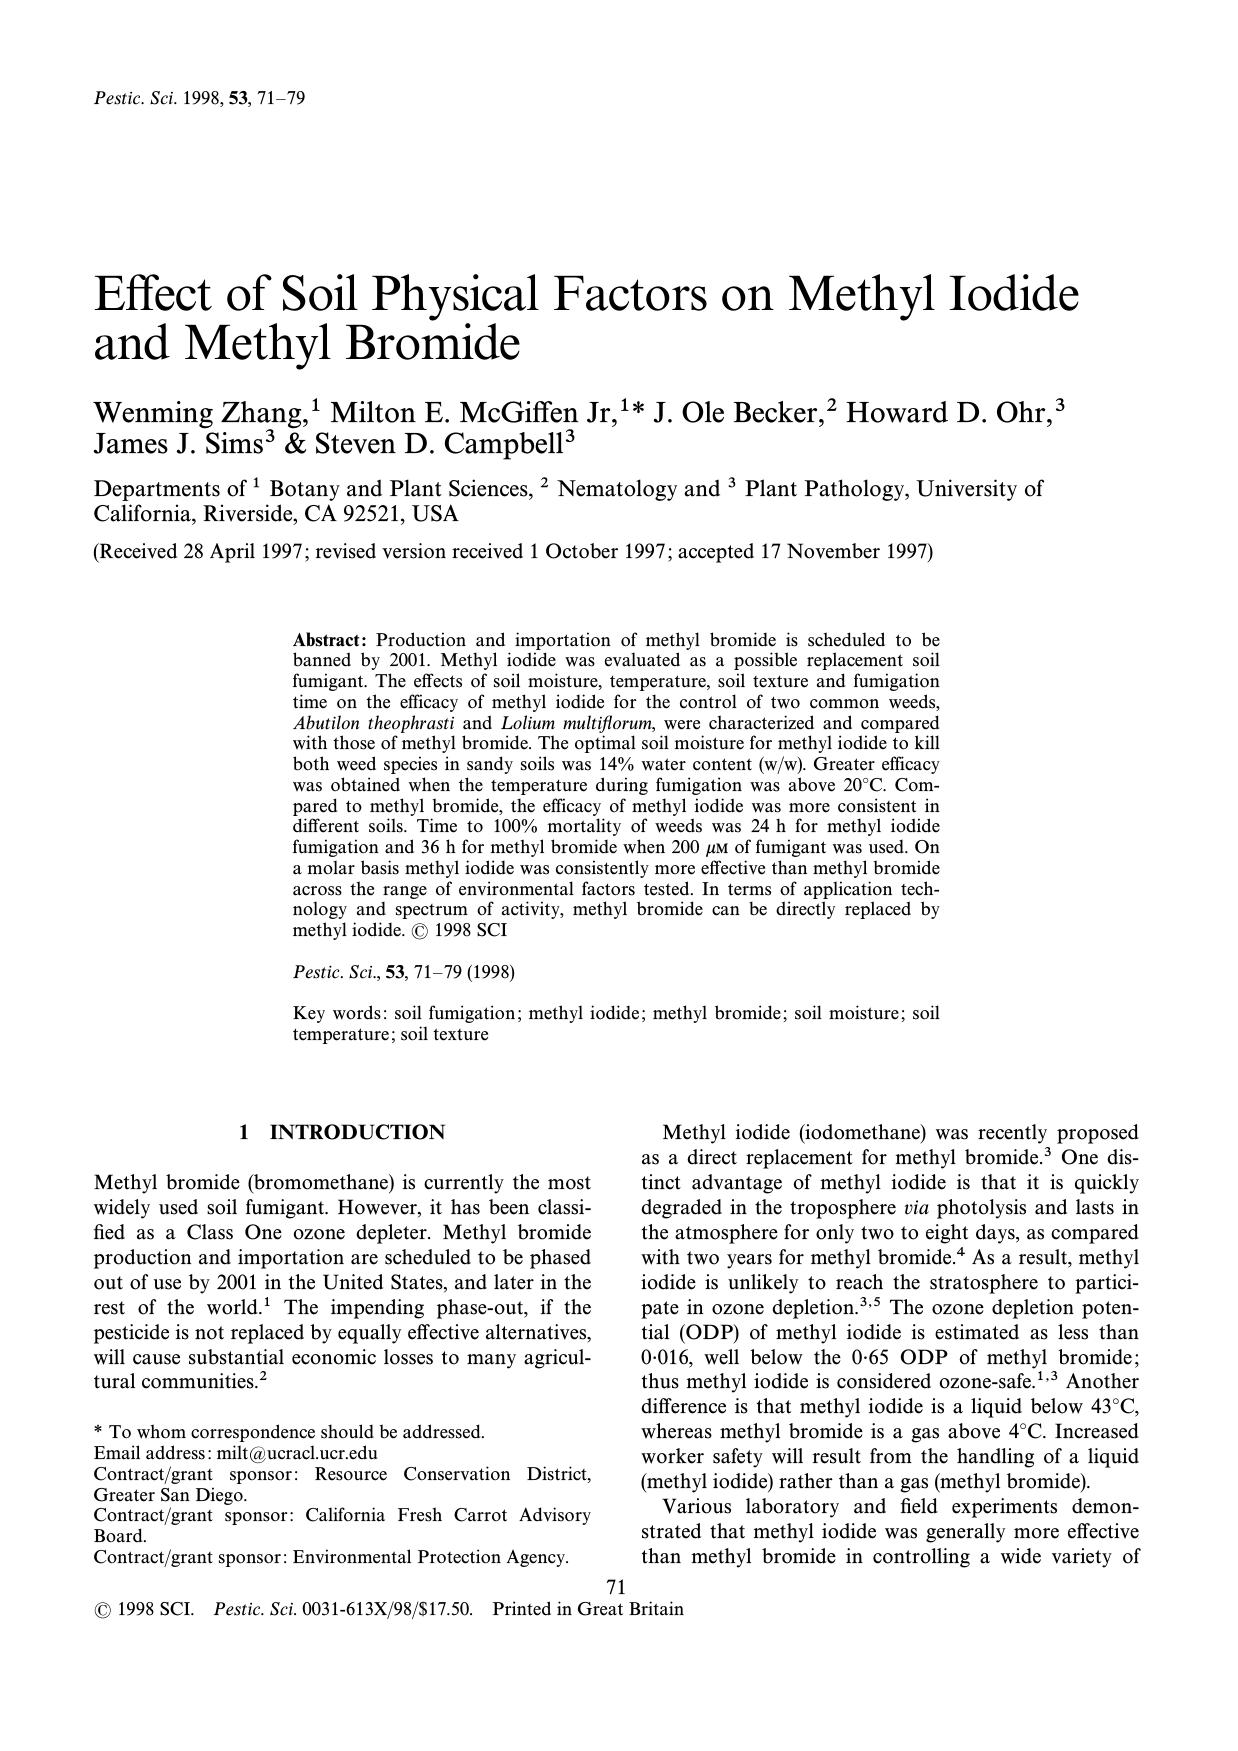 Effect of Soil Physical Factors on Methyl Iodide and Methyl Bromide by Zhang McGiffen Ole Becker Ohr Sims Campbell